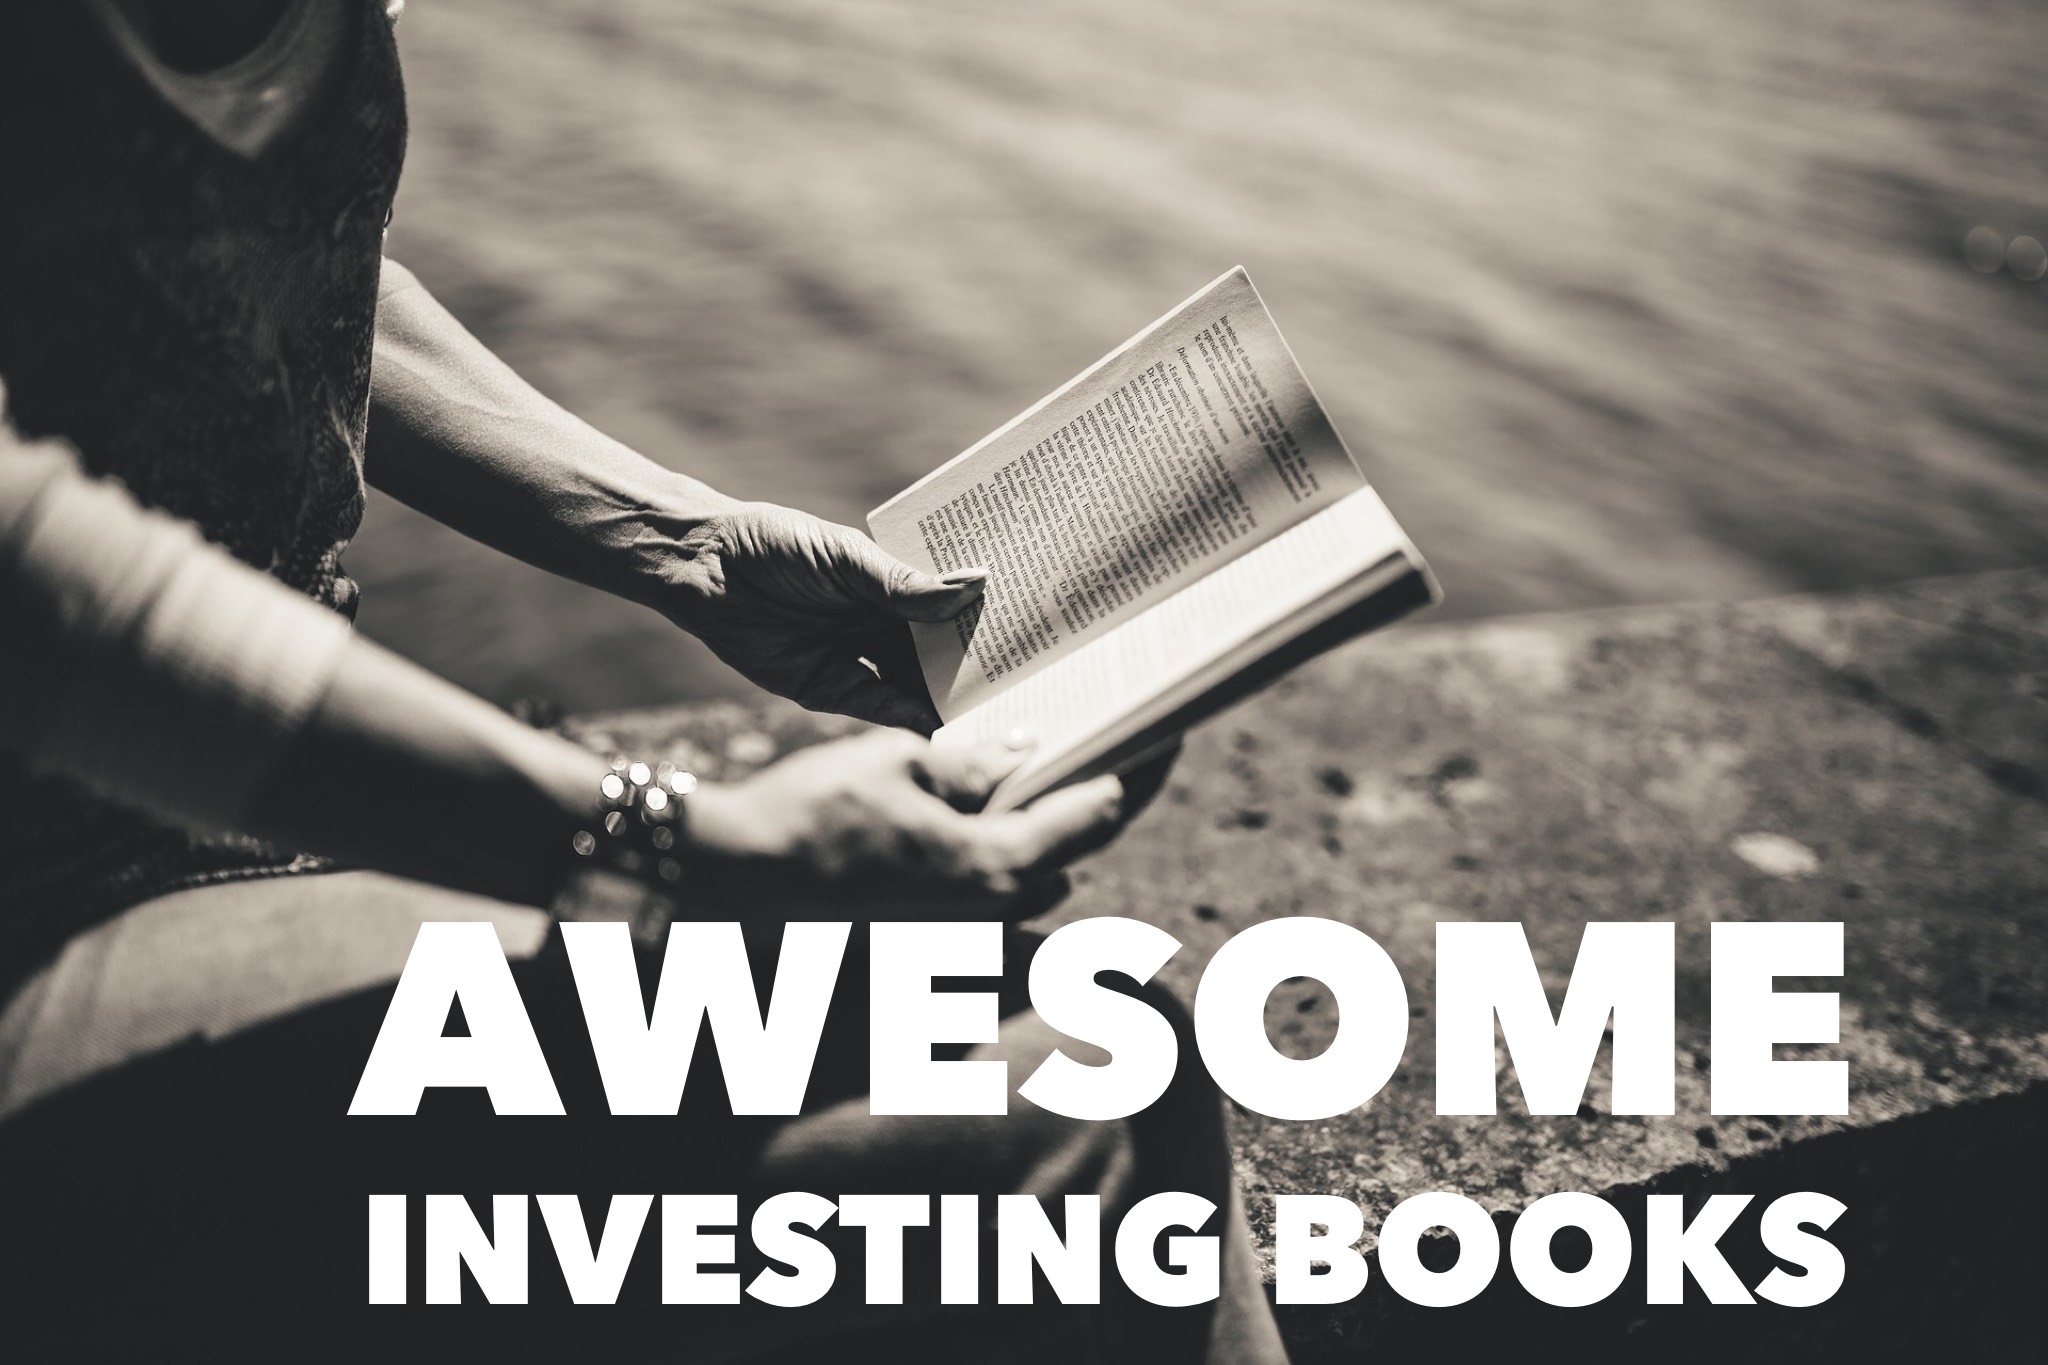 Great investing books